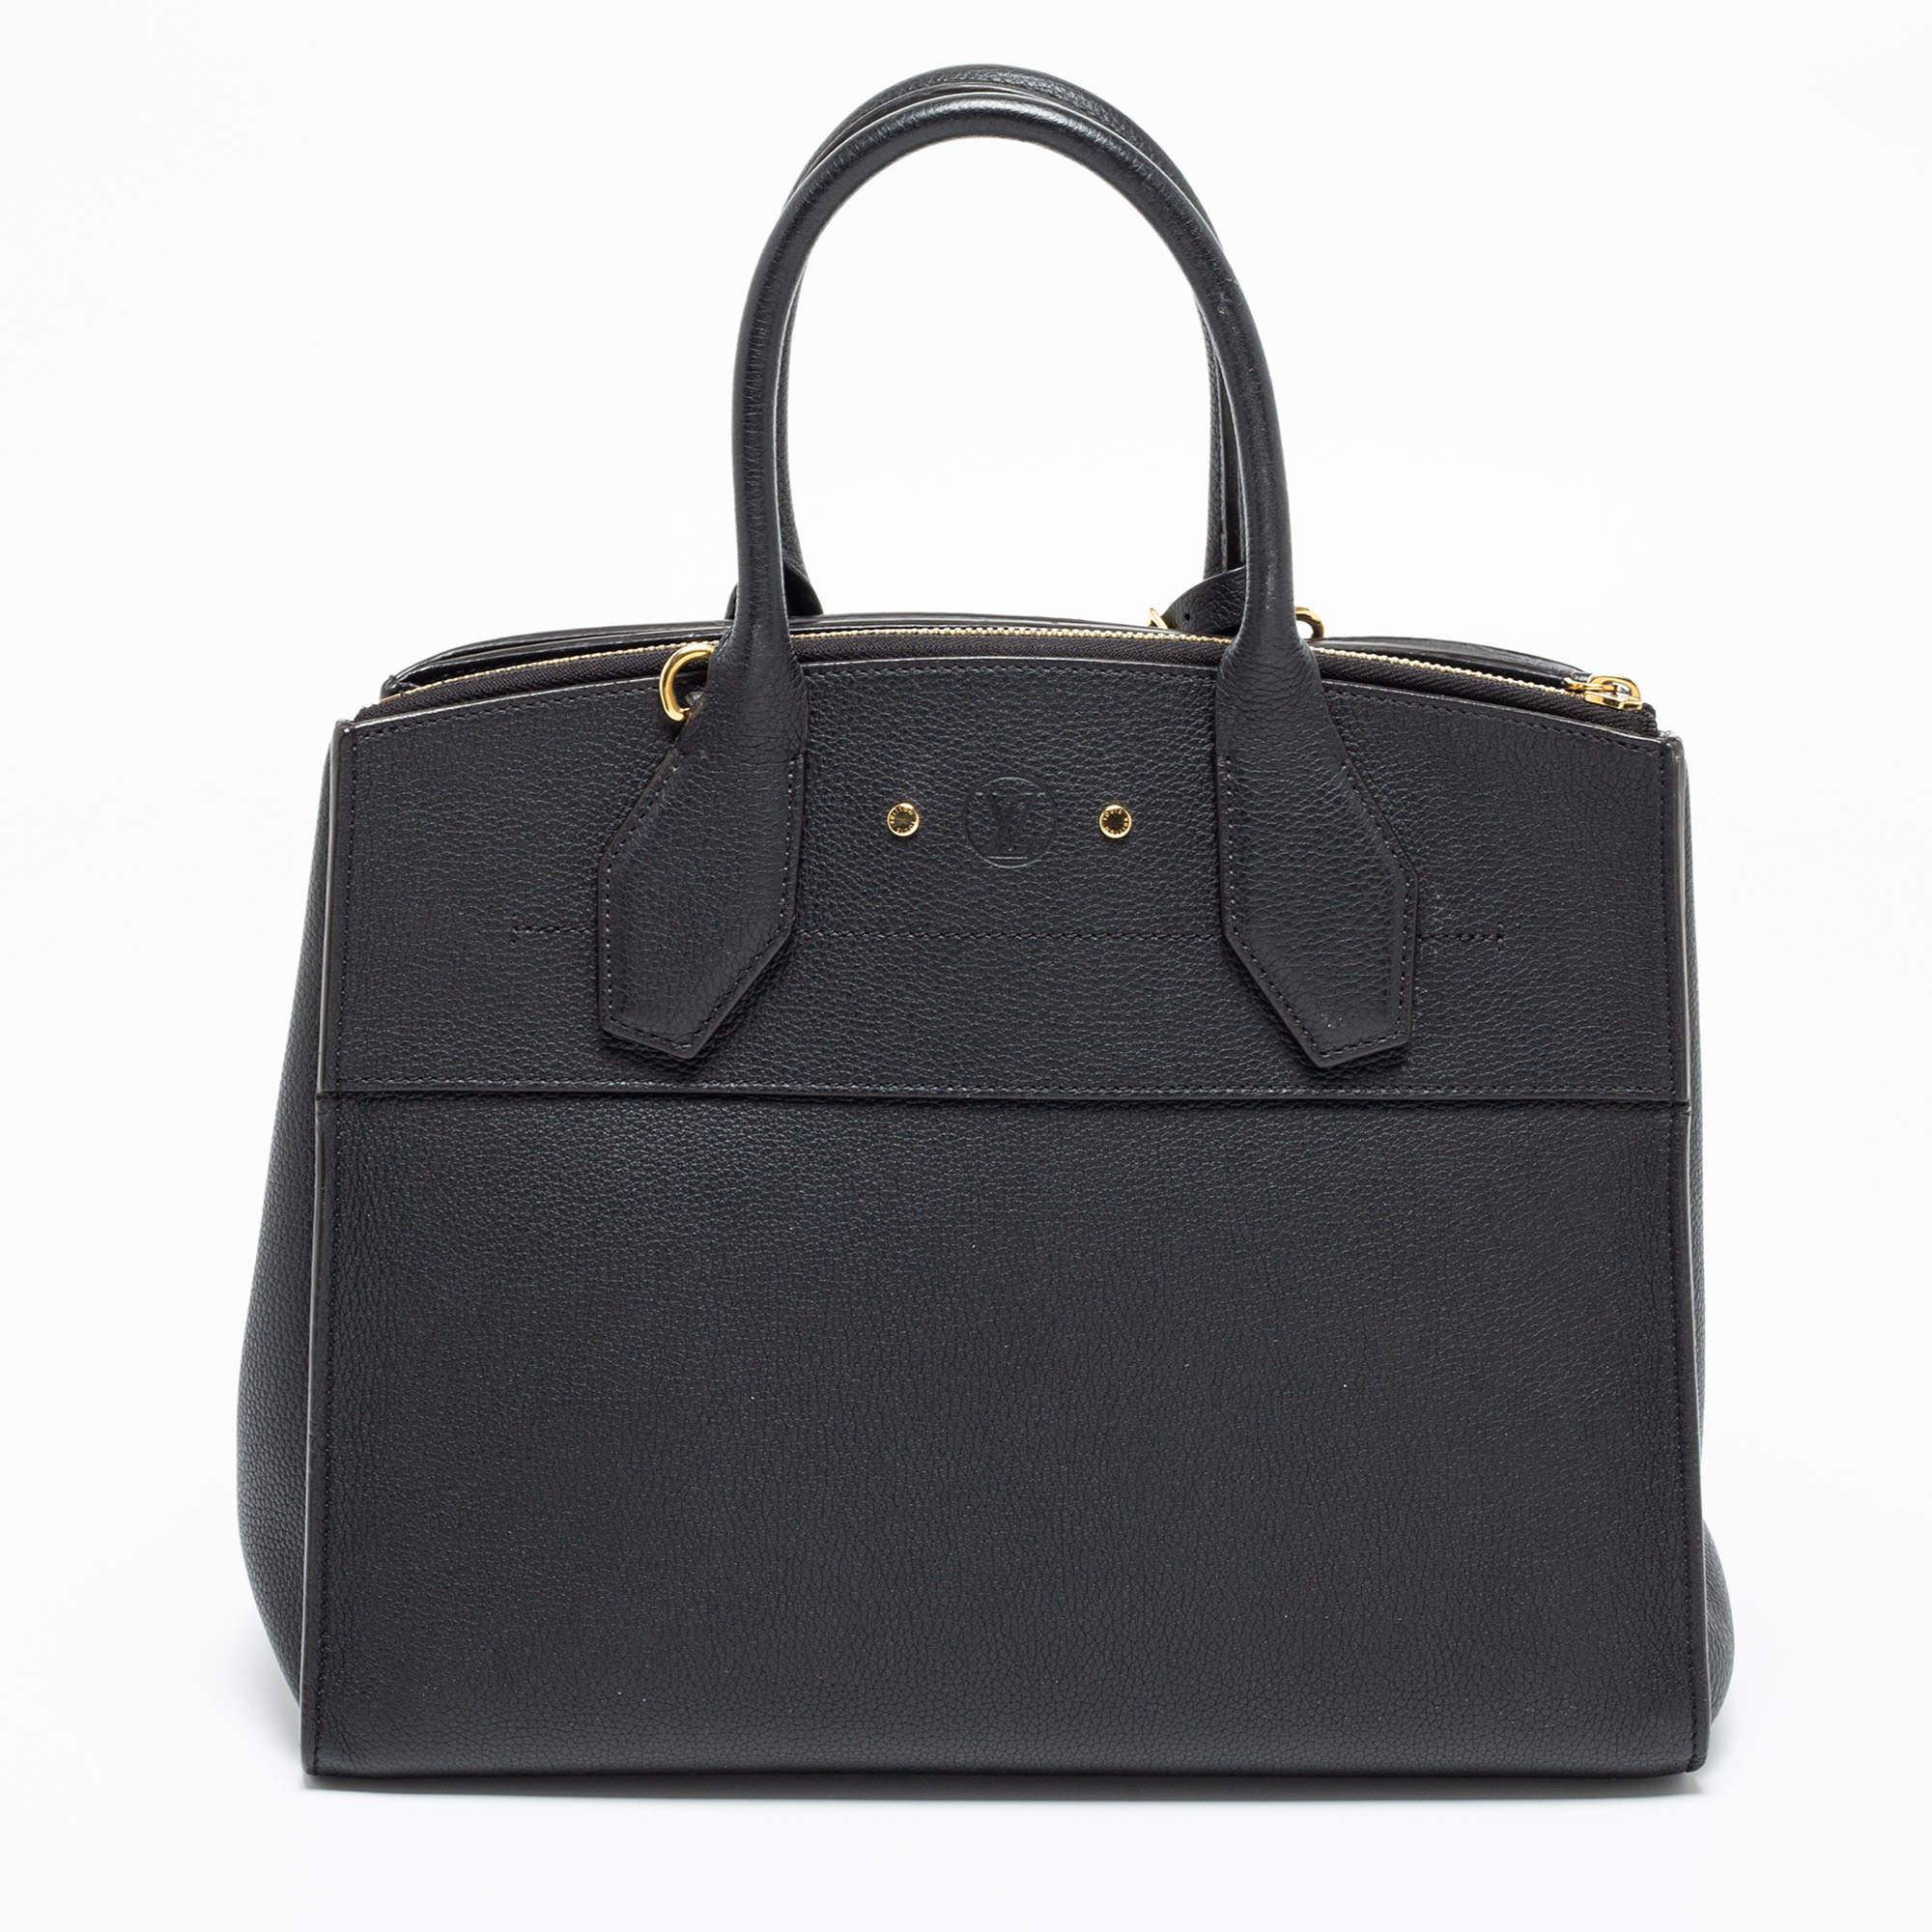 This opulent City Steamer MM bag by Louis Vuitton will ensure a harmonious mix of utility and classic appeal. Crafted from leather, it features a black shade, a spacious interior, dual top rolled handles, and a detachable shoulder strap for